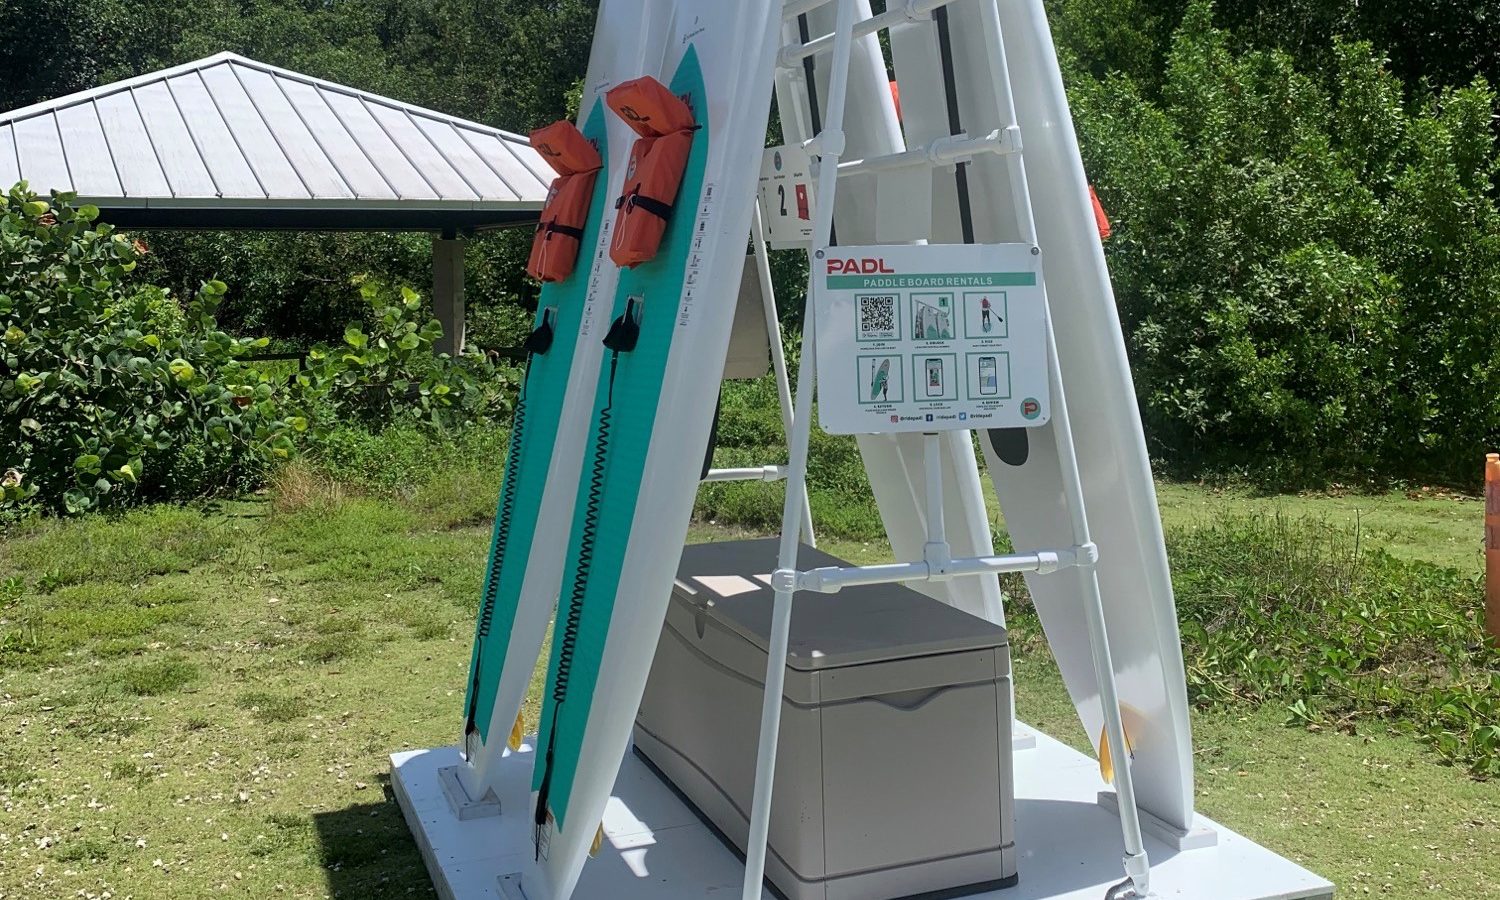 Paddle Board Rental Station at Deering Point